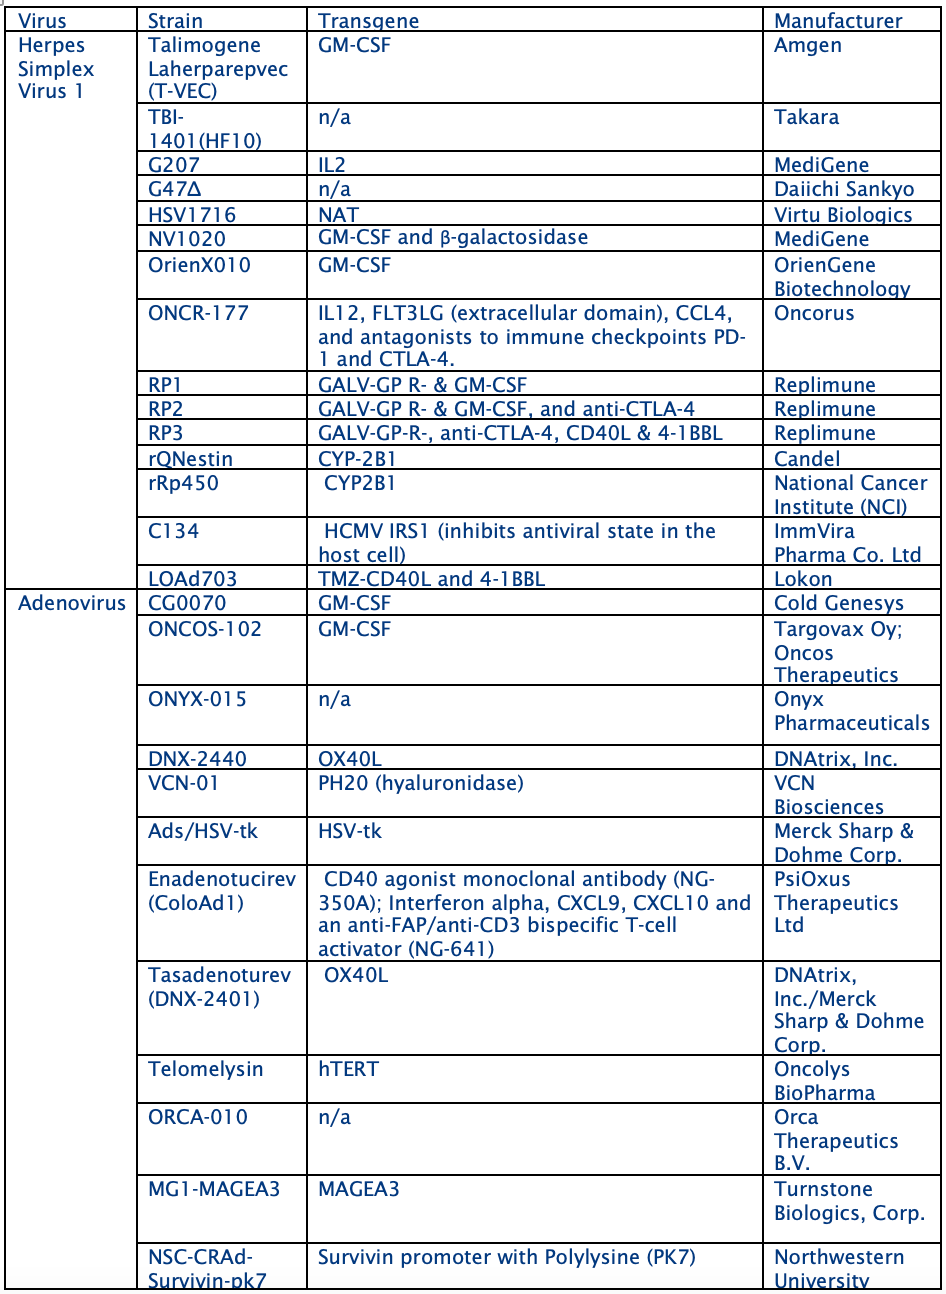 Table 1. Common Herpes Simplex Virus and Adenovirus in Clinical Development for Cancer Treatment